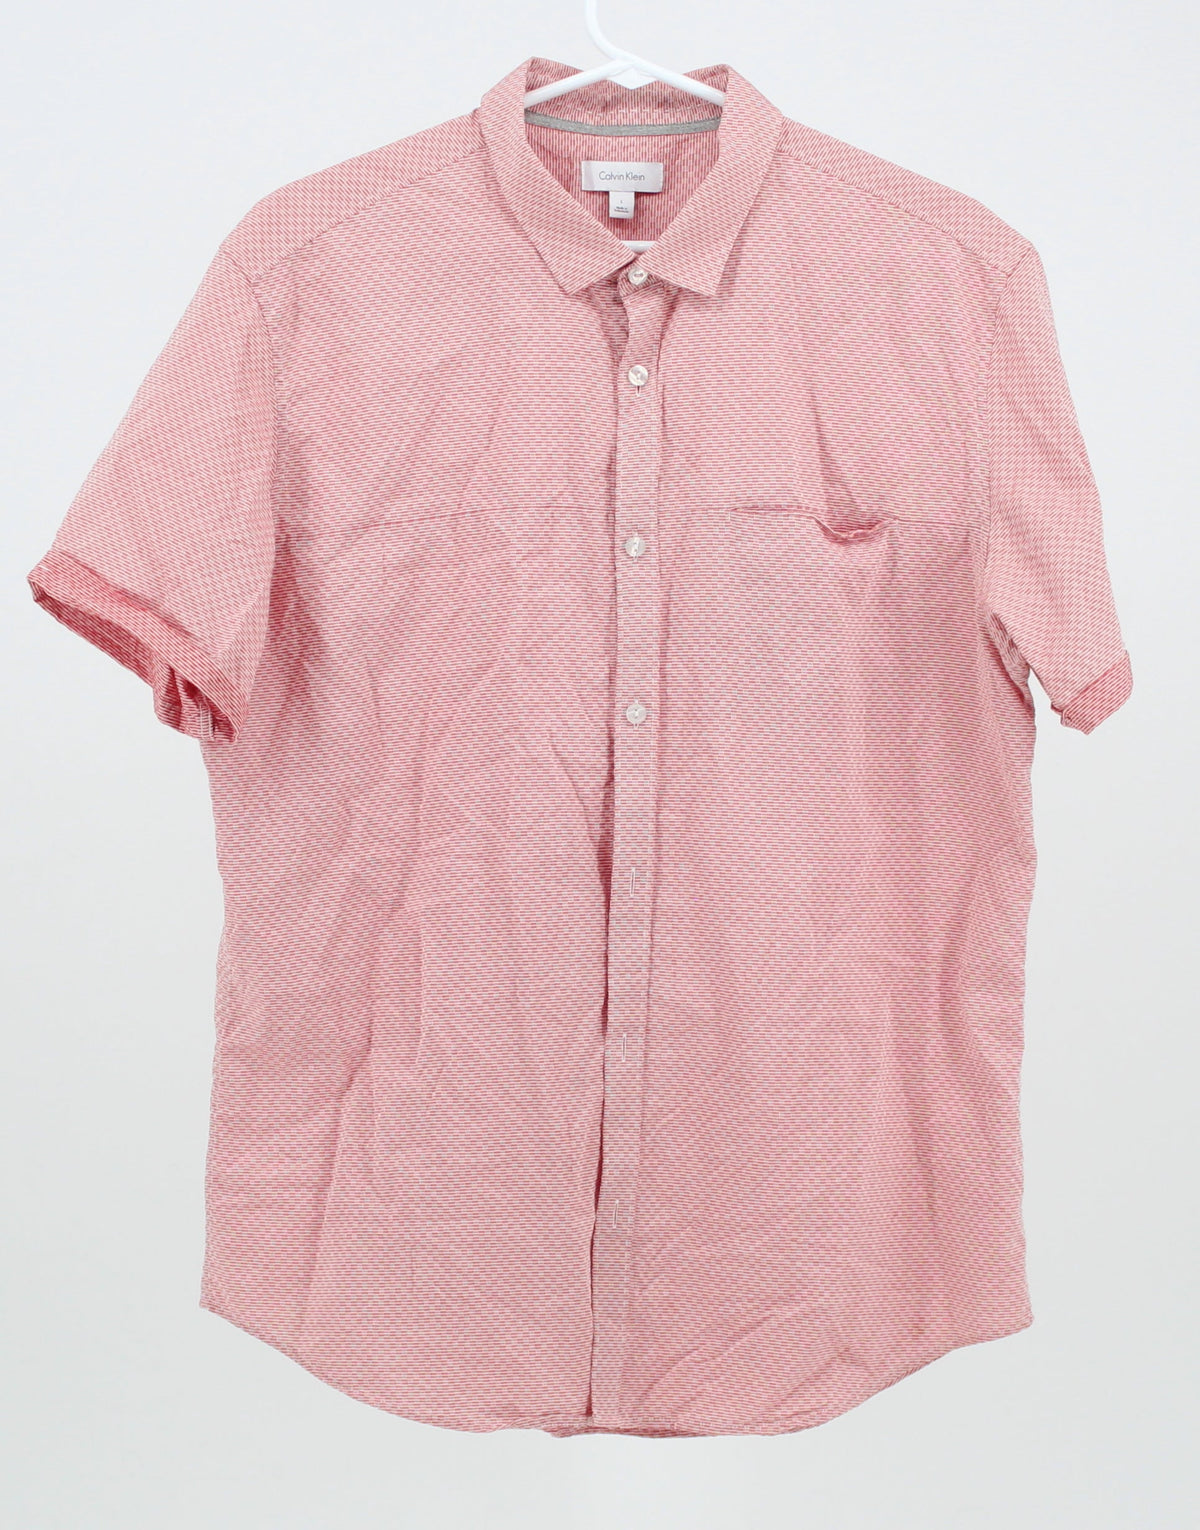 Calvin Klein Red and White Patterned Short sleeve Button-Up Shirt